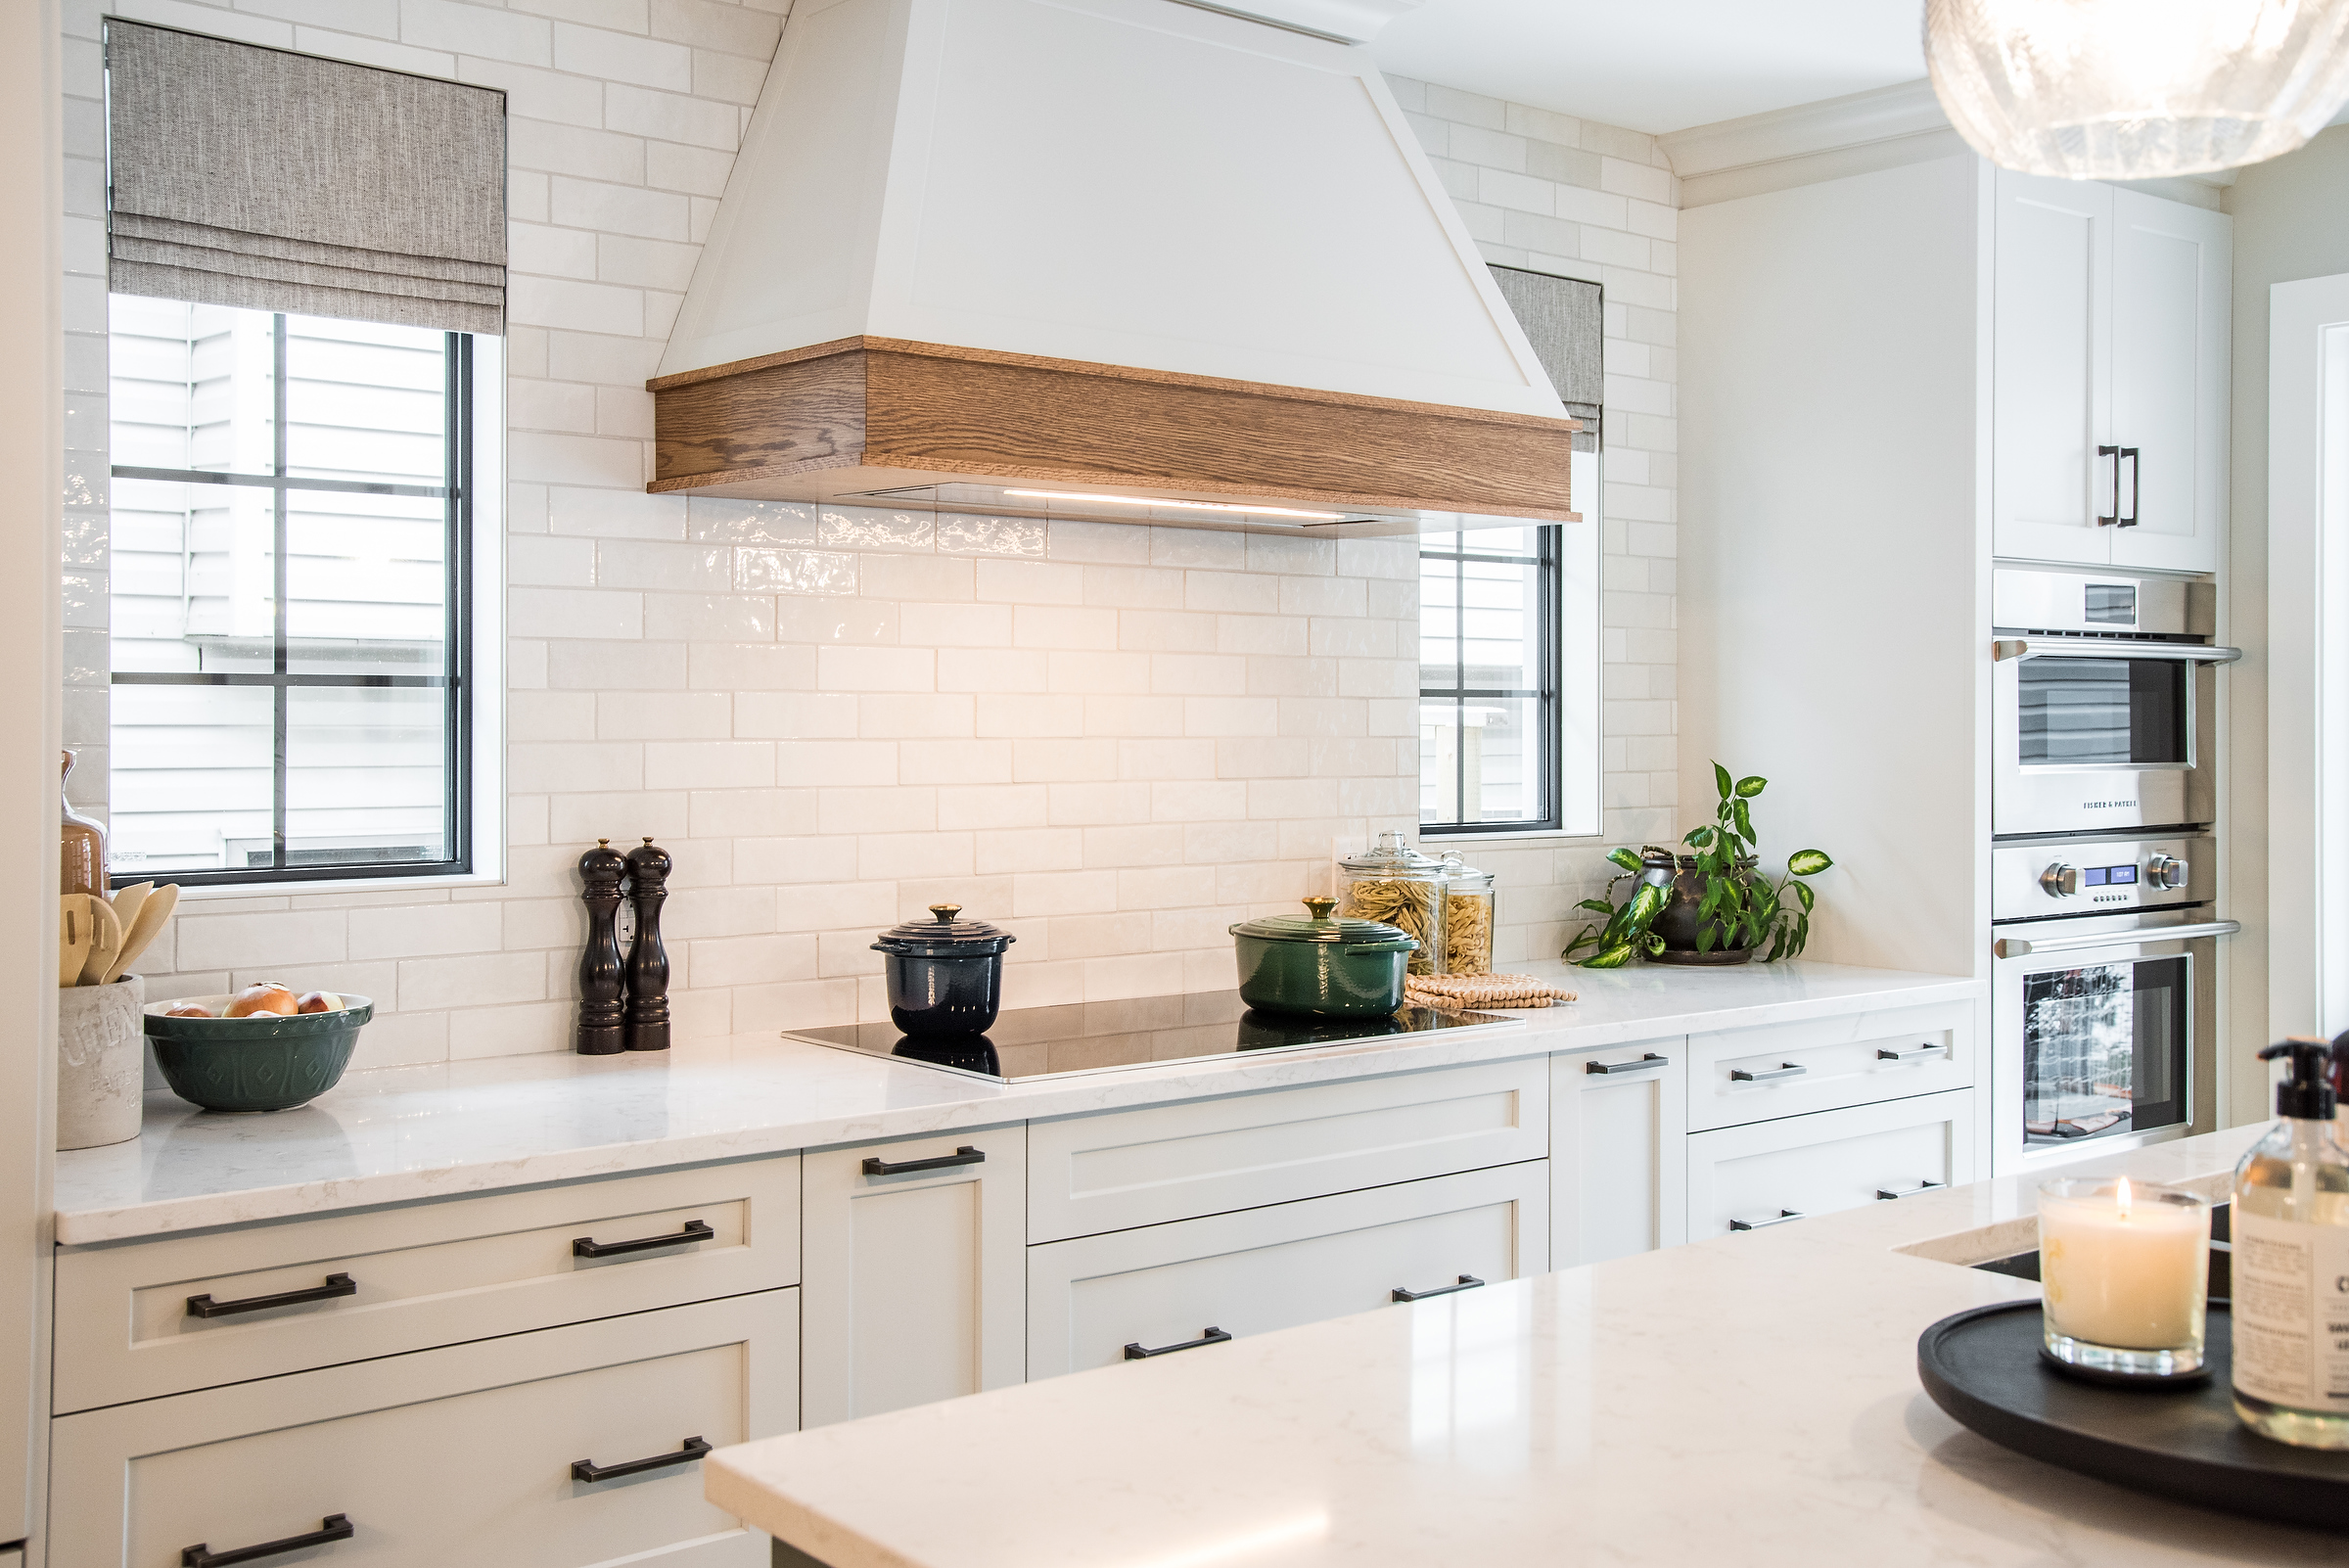 White kitchen with classic subway tile, white cabinetry and quartz countertops. Renovation of an Edmonton home